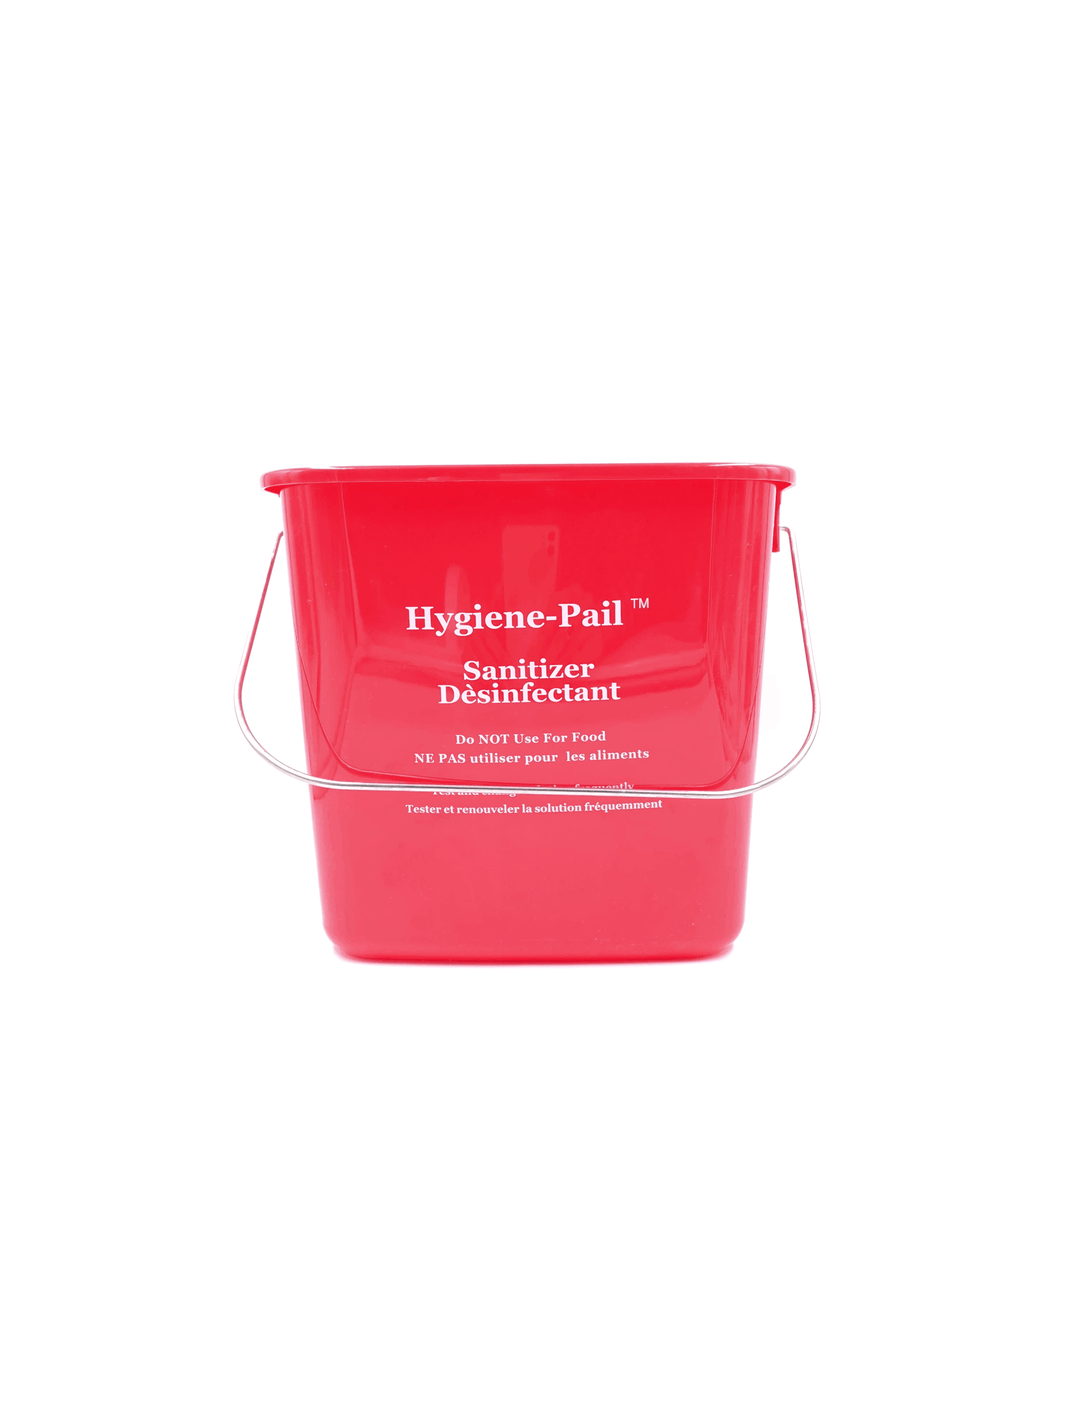 Red 3 Quart Cleaning Bucket For Home Or Commercial Use / KNICER